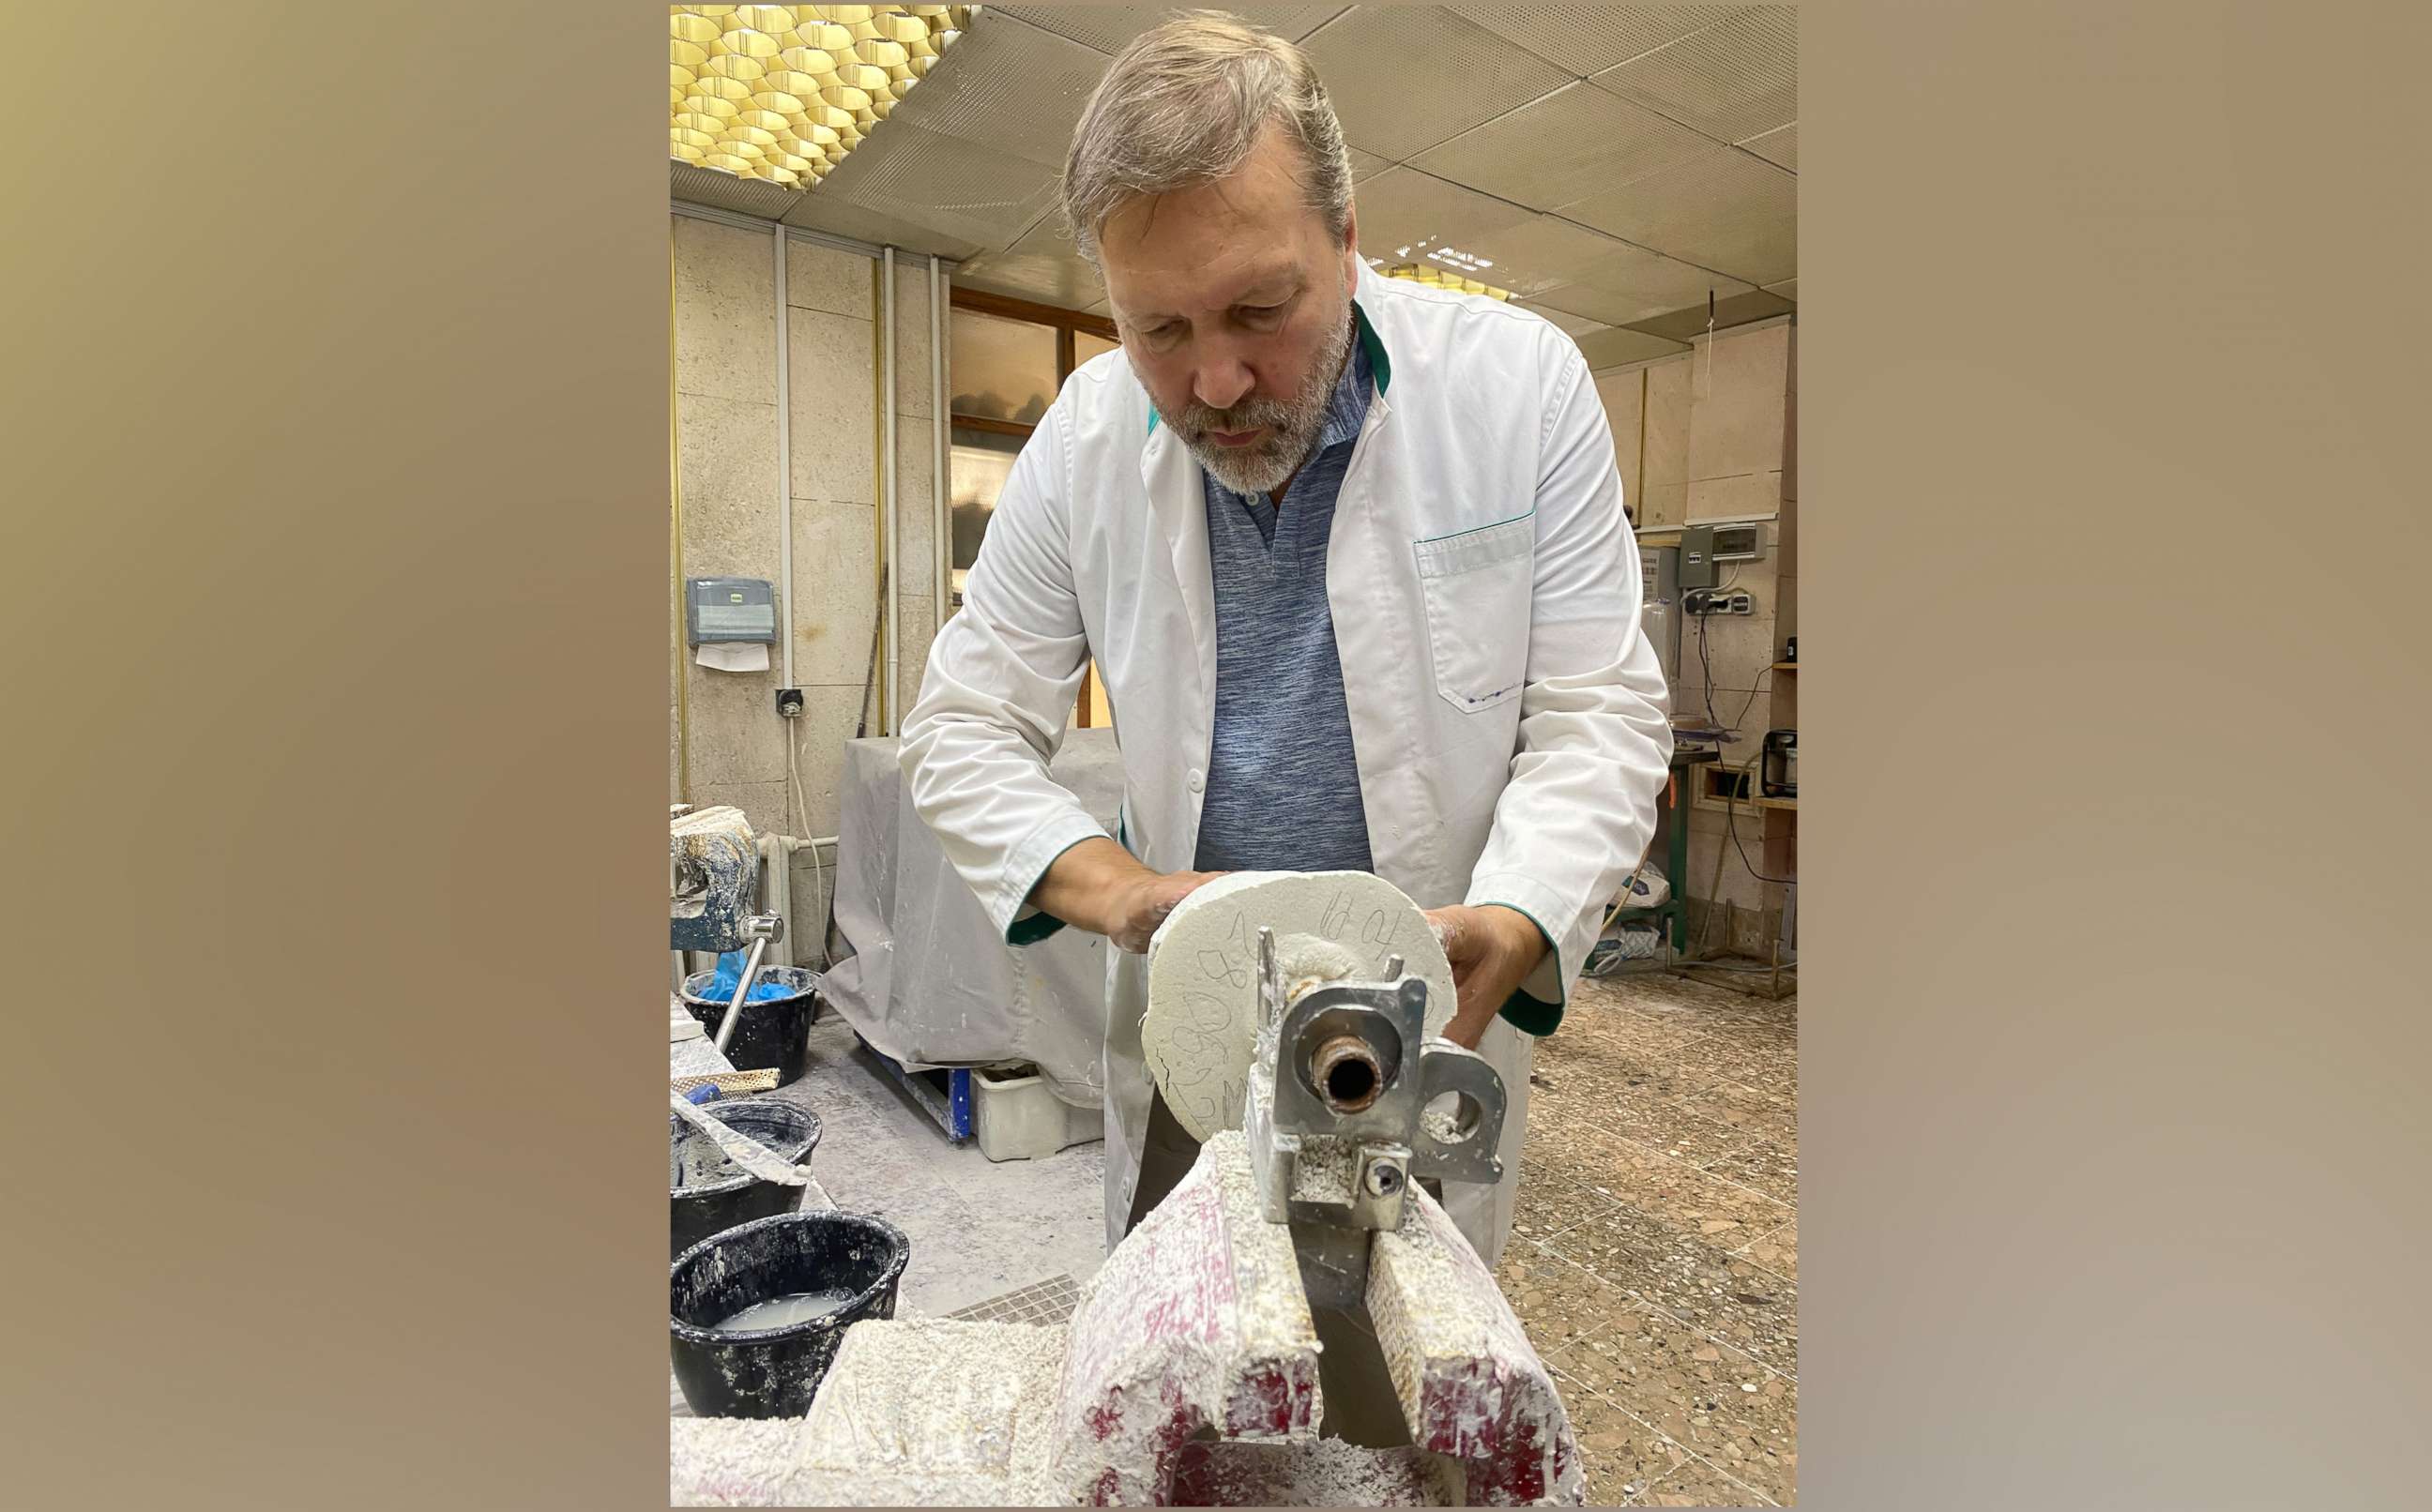 PHOTO: Dr. Oleksandr Stetsenko, seen in this undated photo, is one of Ukraine’s leading medical experts on developing prosthetic limbs for amputees and says there has been a surge in demand for artificial arms and legs since Russia invaded Ukraine.